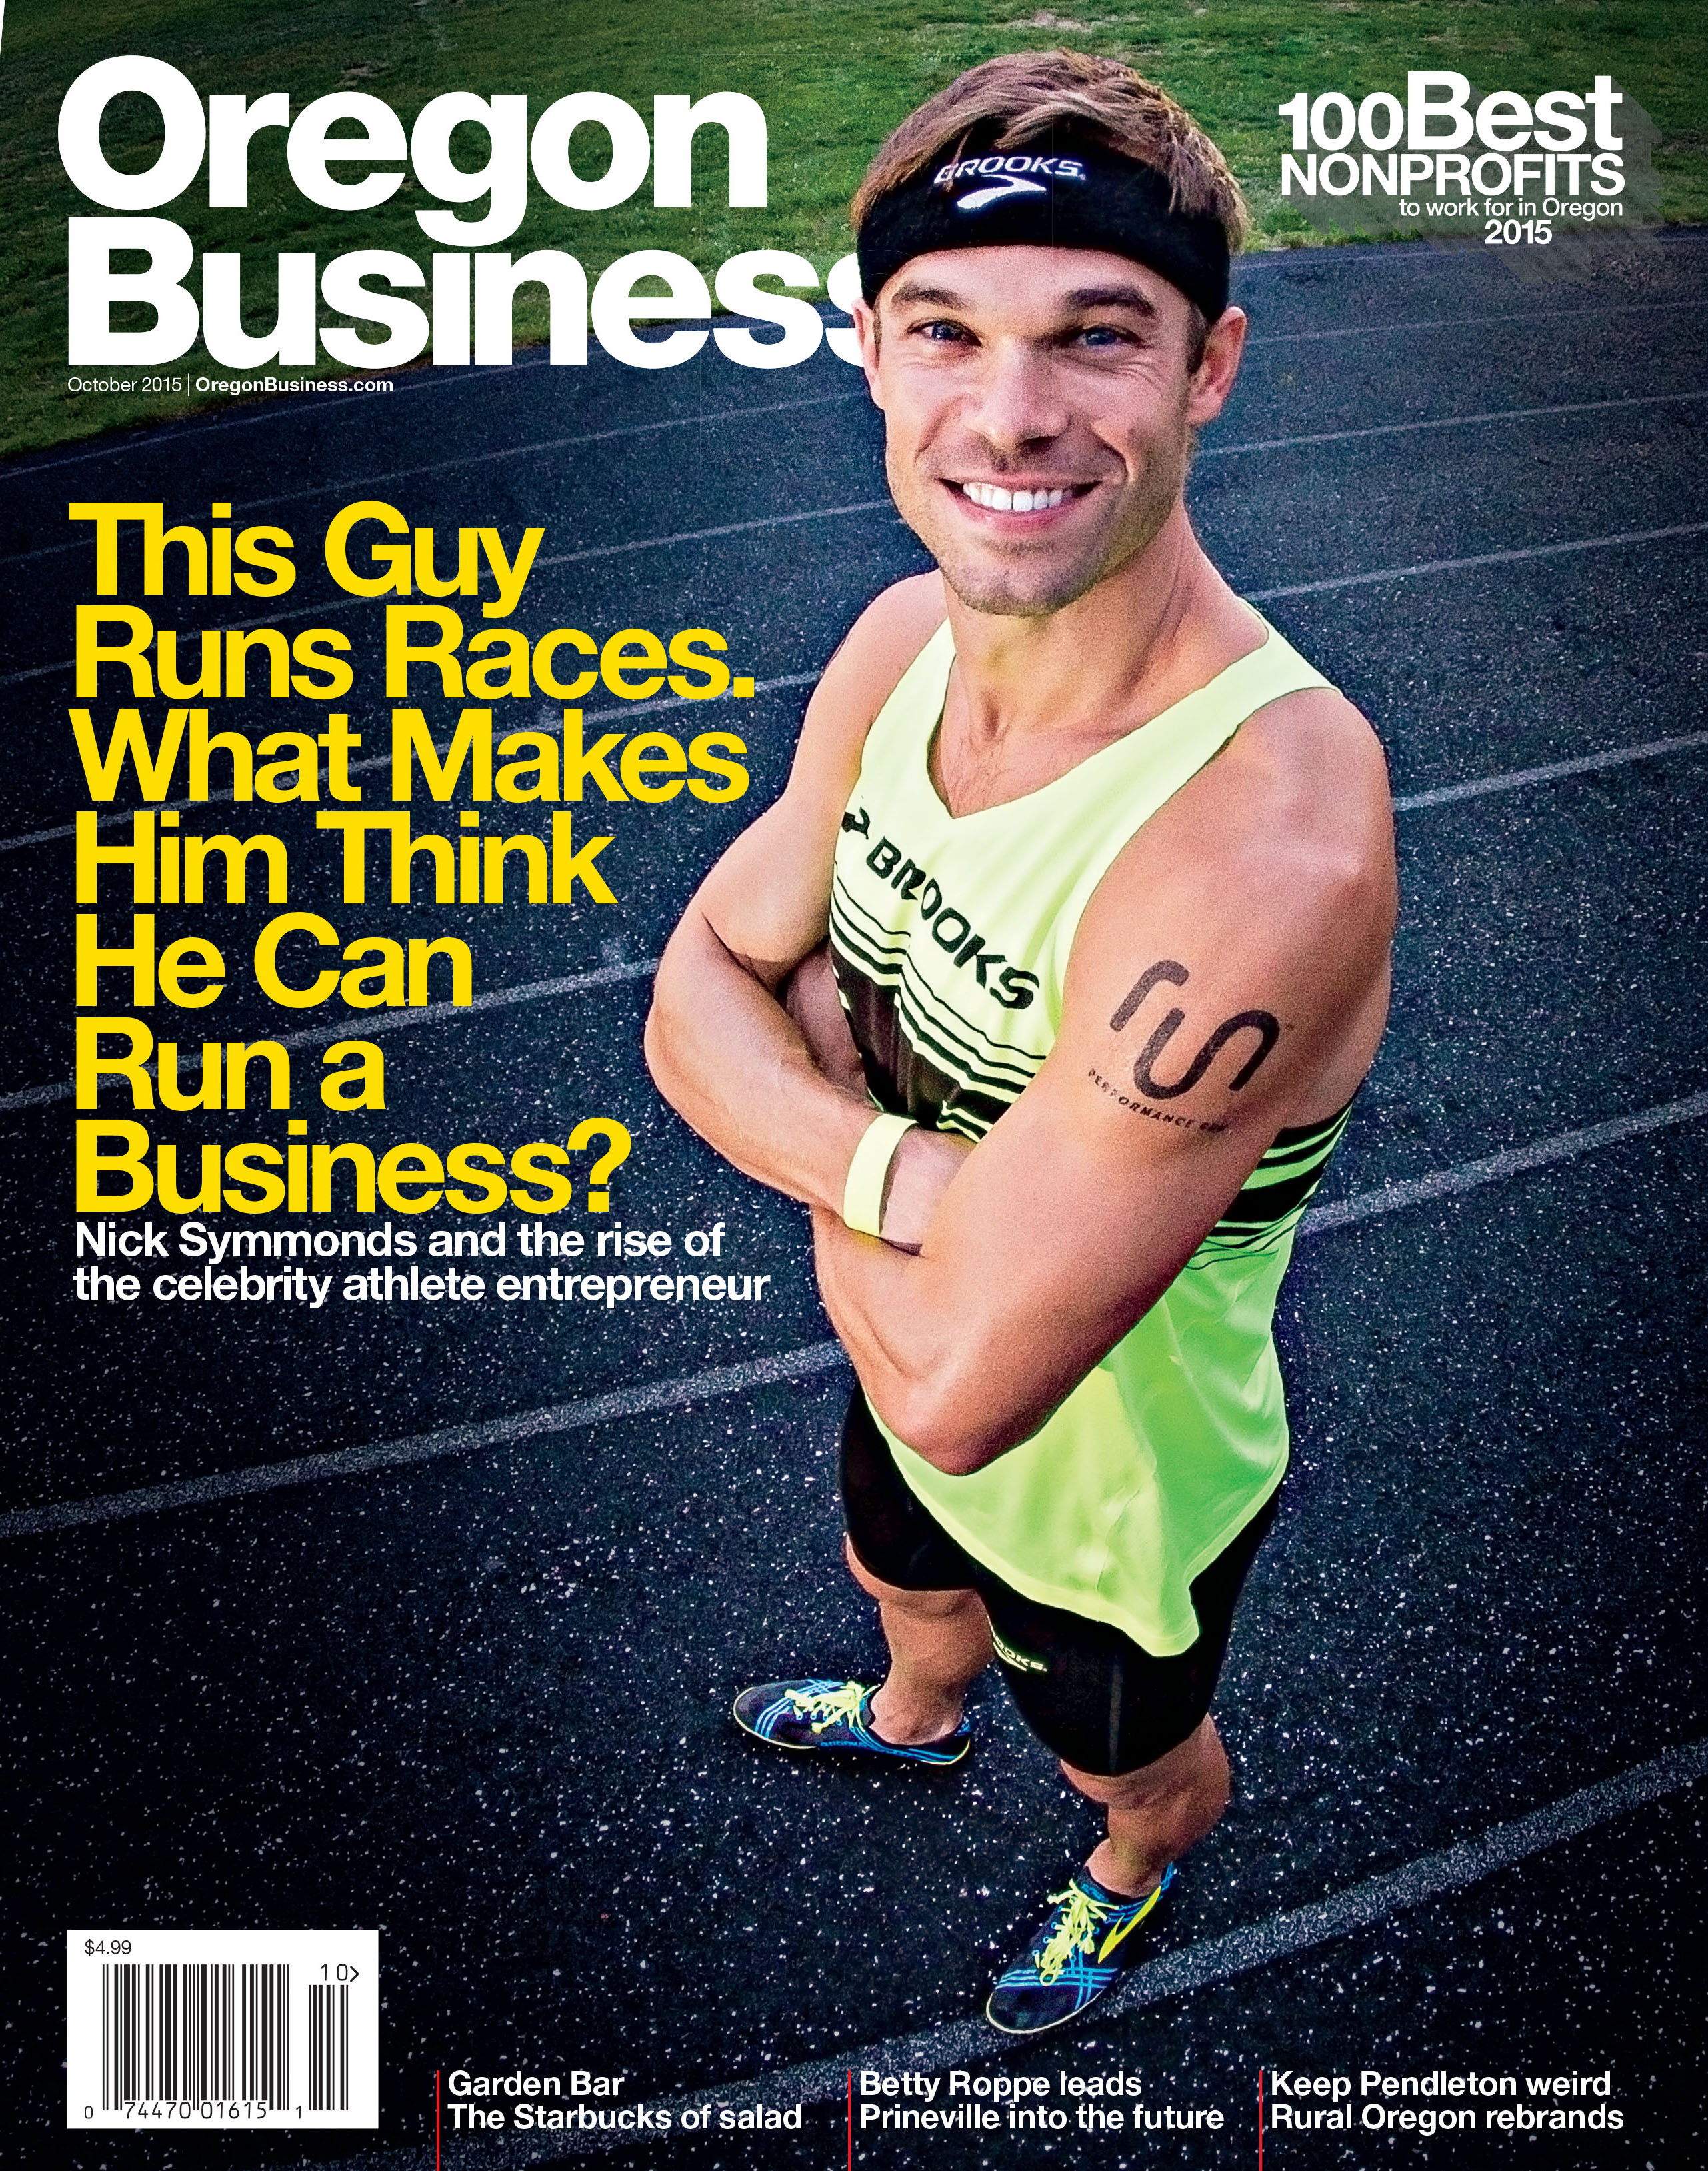 Oregon Business Cover October 2015